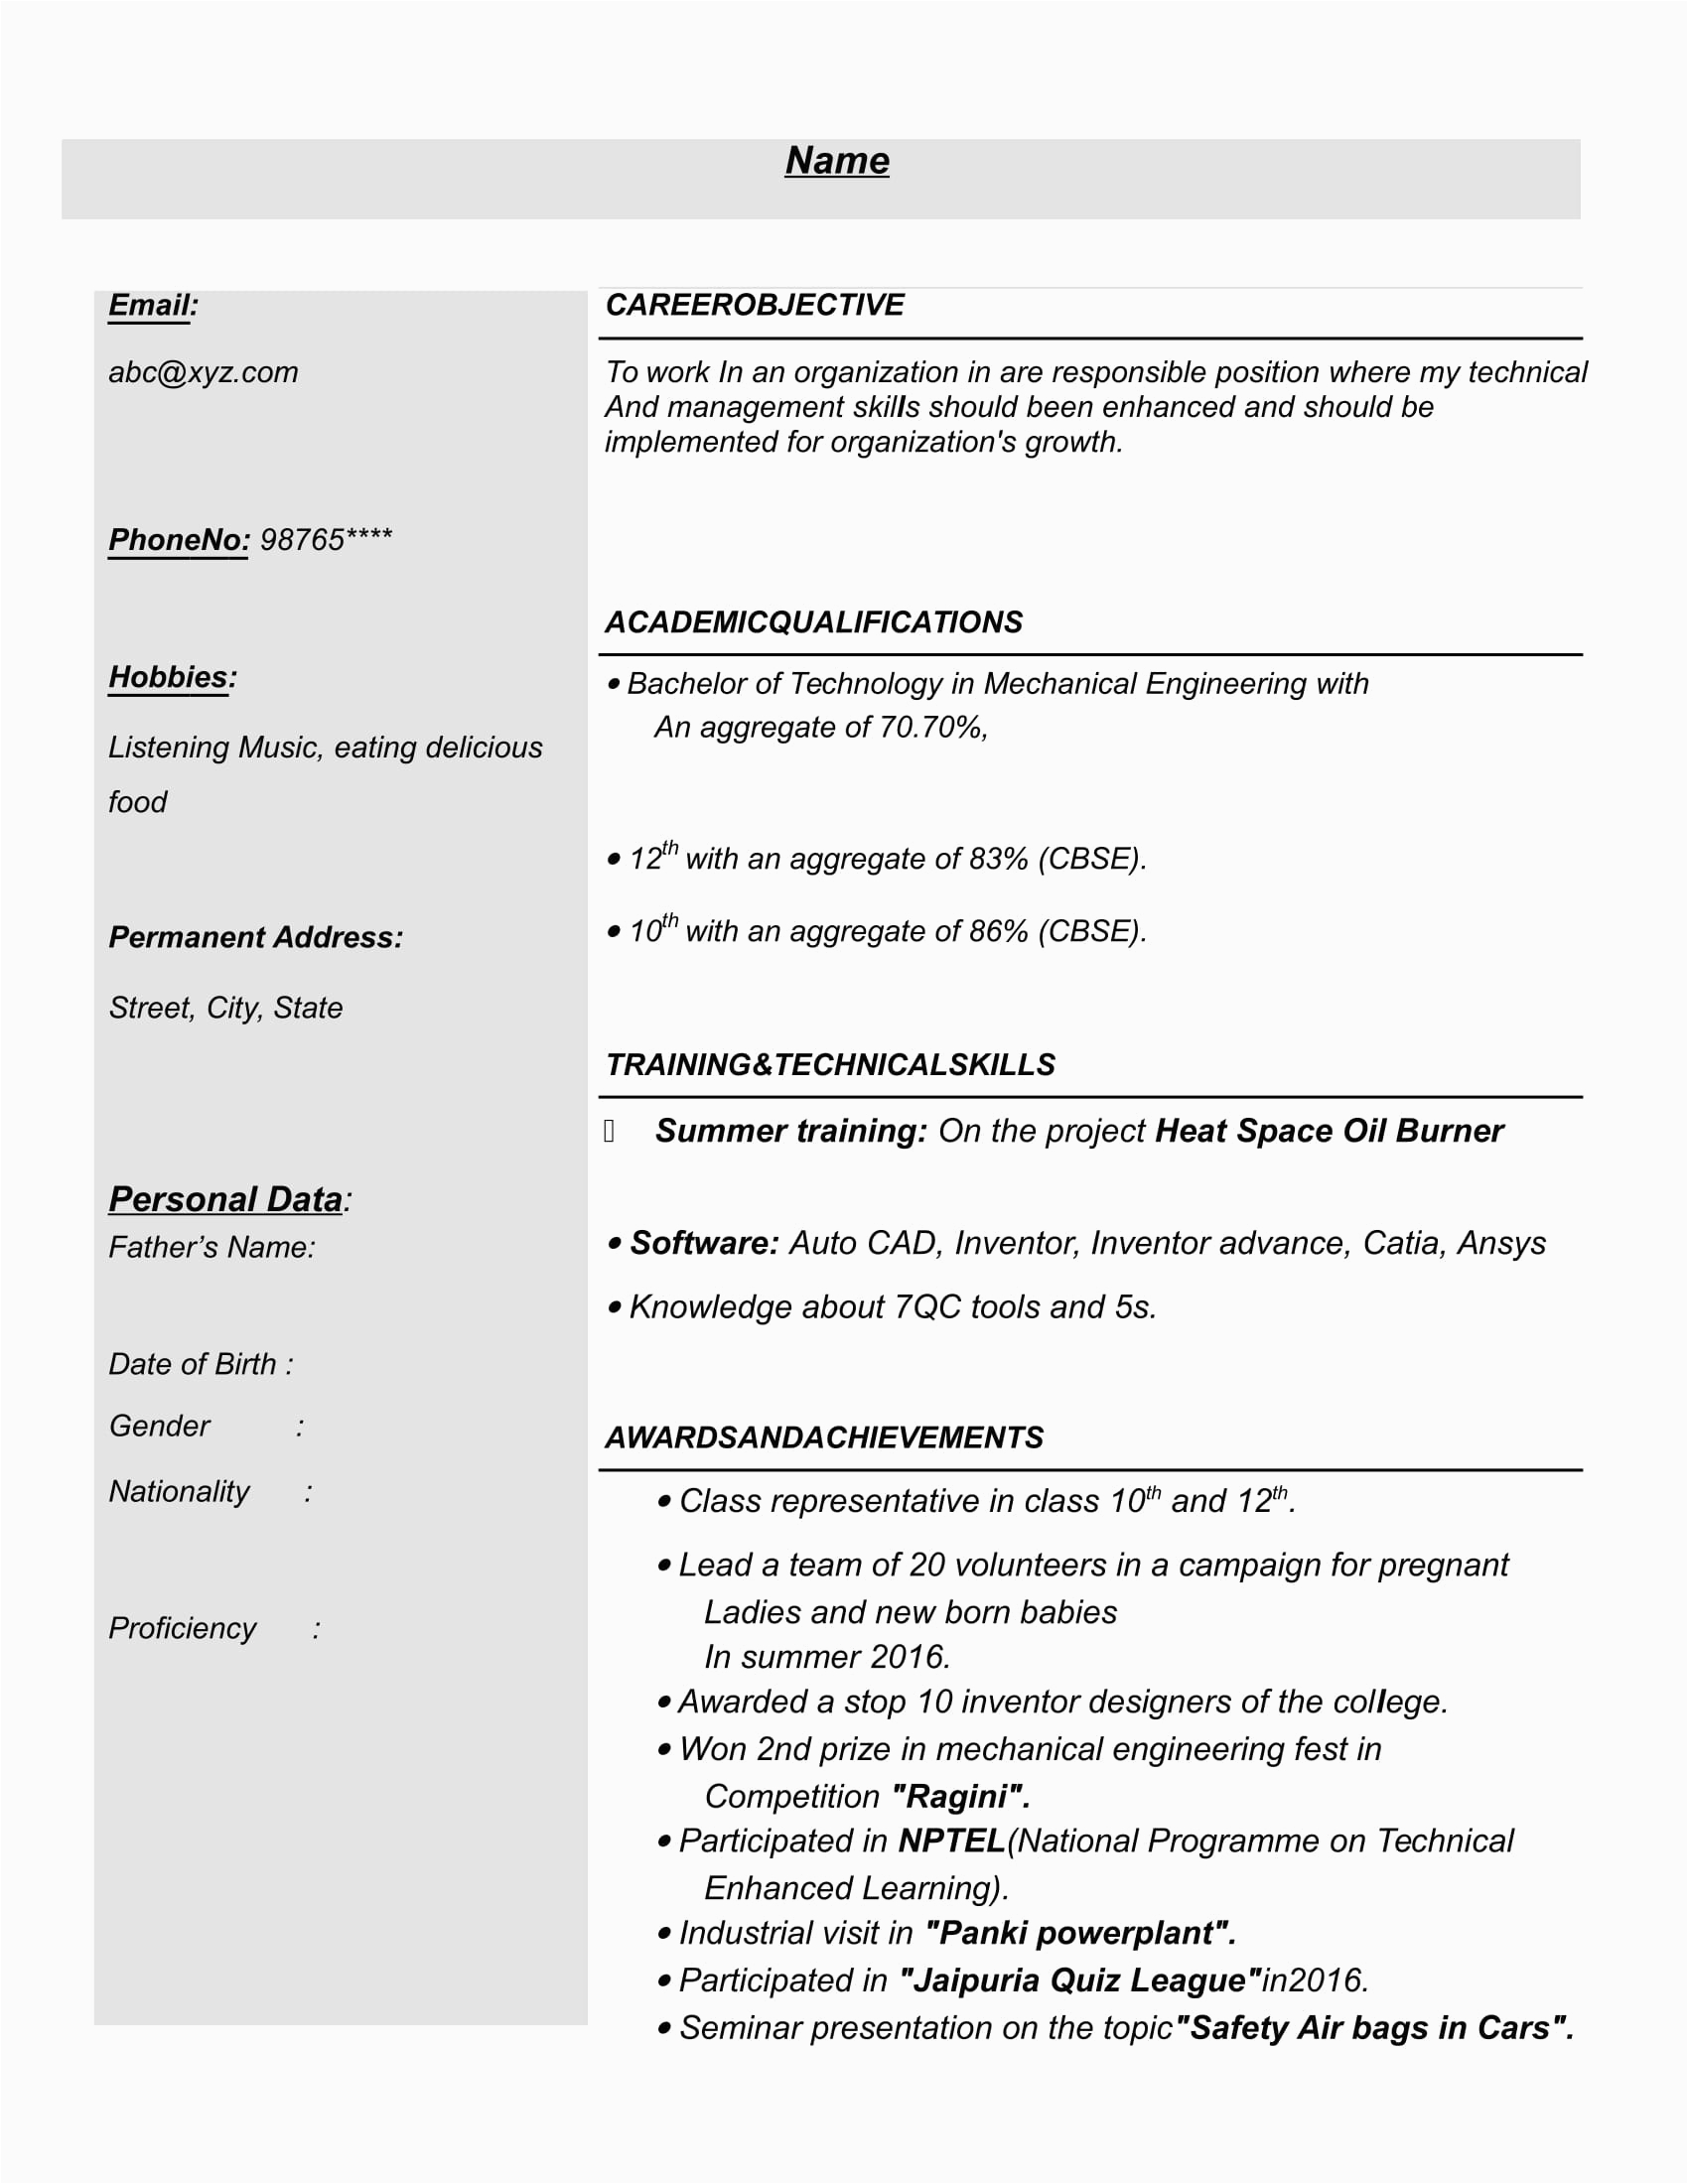 Sample Mechanical Engineering Resume for Freshers Resume Templates for Mechanical Engineer Freshers Download Free